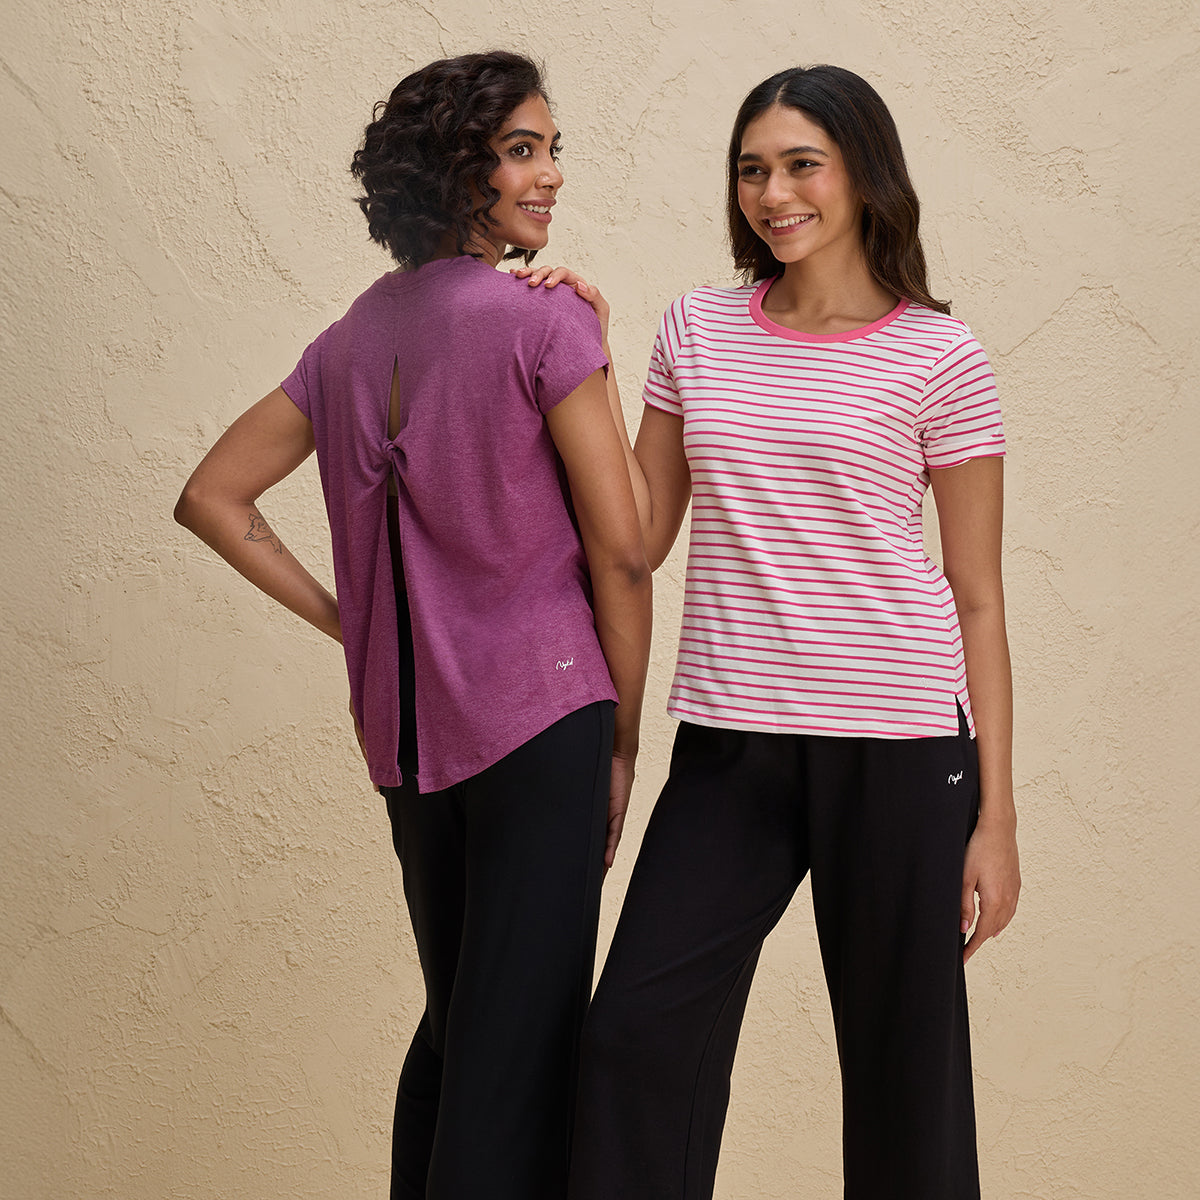 Nykd By Nykaa Breathable Cotton Tee with 2 Degree Cooling Tech-NYLE605-Pink White Stripe